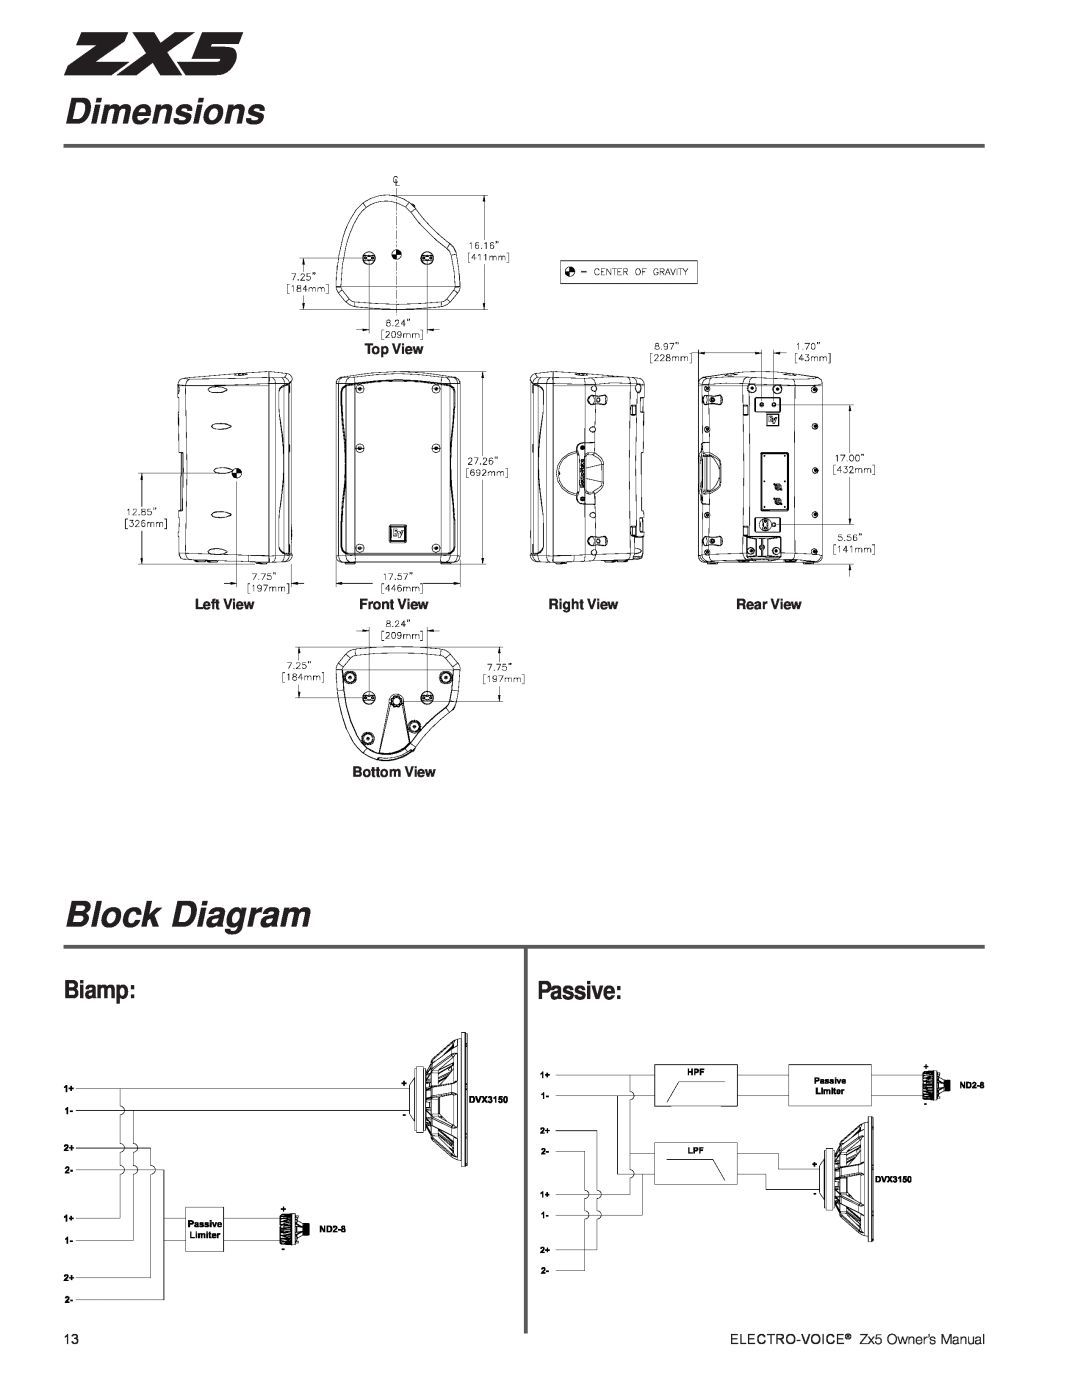 Electro-Voice ZX5 Series Dimensions, Block Diagram, Biamp, Passive, Top View, Left View, Right View, Bottom View 